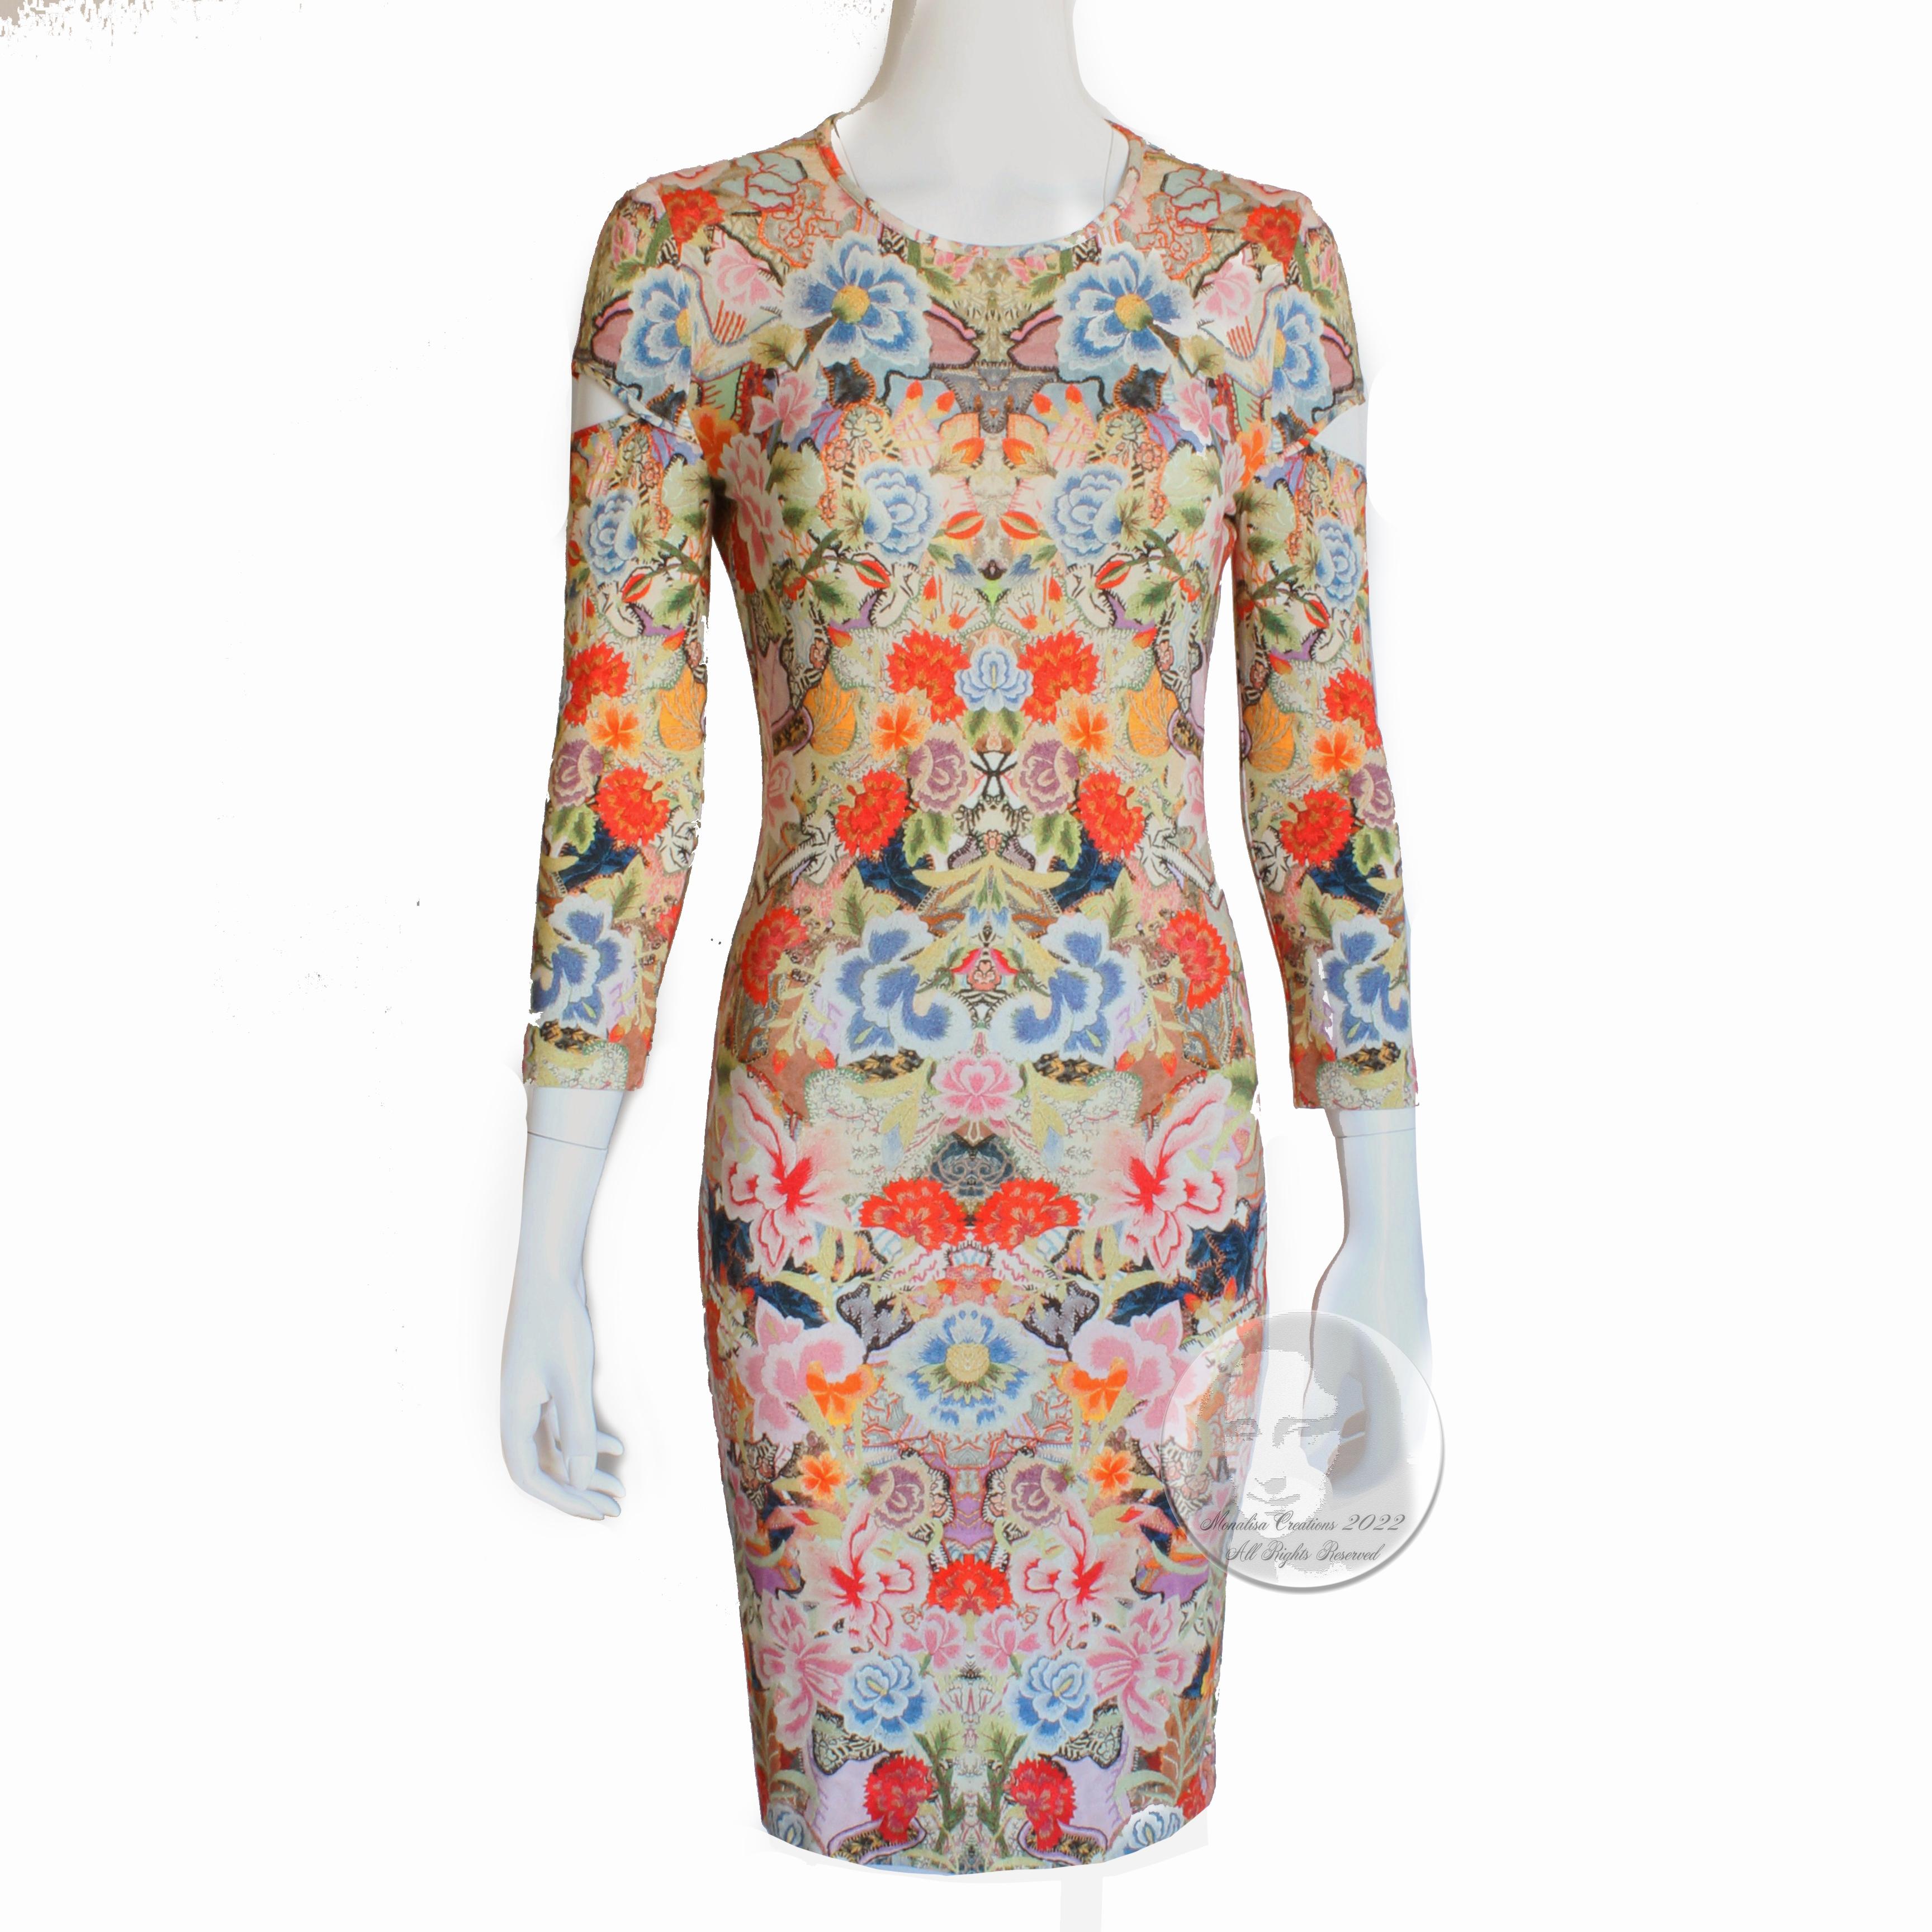 Authentic, preowned Alexander McQueen slash sleeve abstract kaleidoscope floral dress from 2014. Made from a rayon/elastane blend fabric, this dress is designed to show off your curves! Slick slash sleeve design, it's so easy to wear and style!  